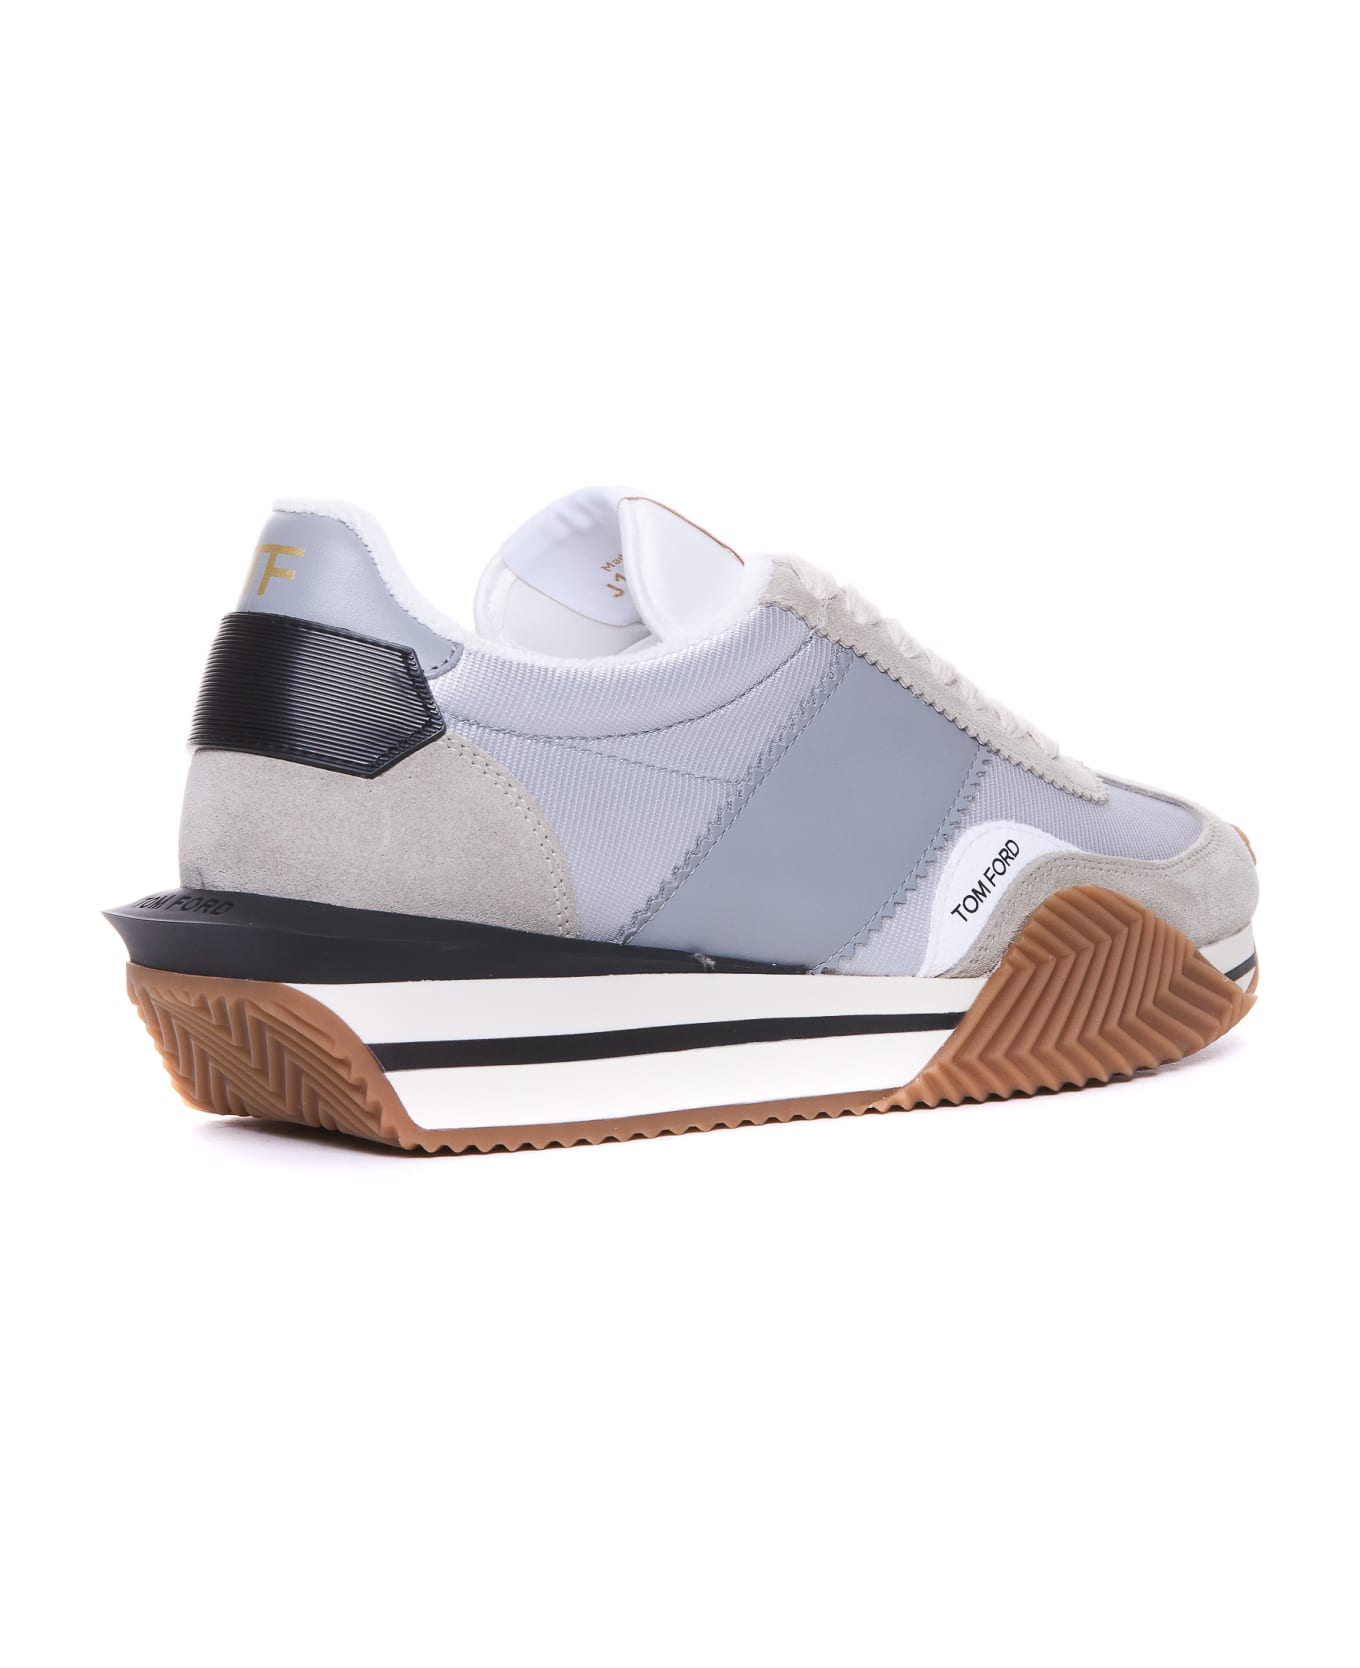 Tom Ford James Sneakers - Silver